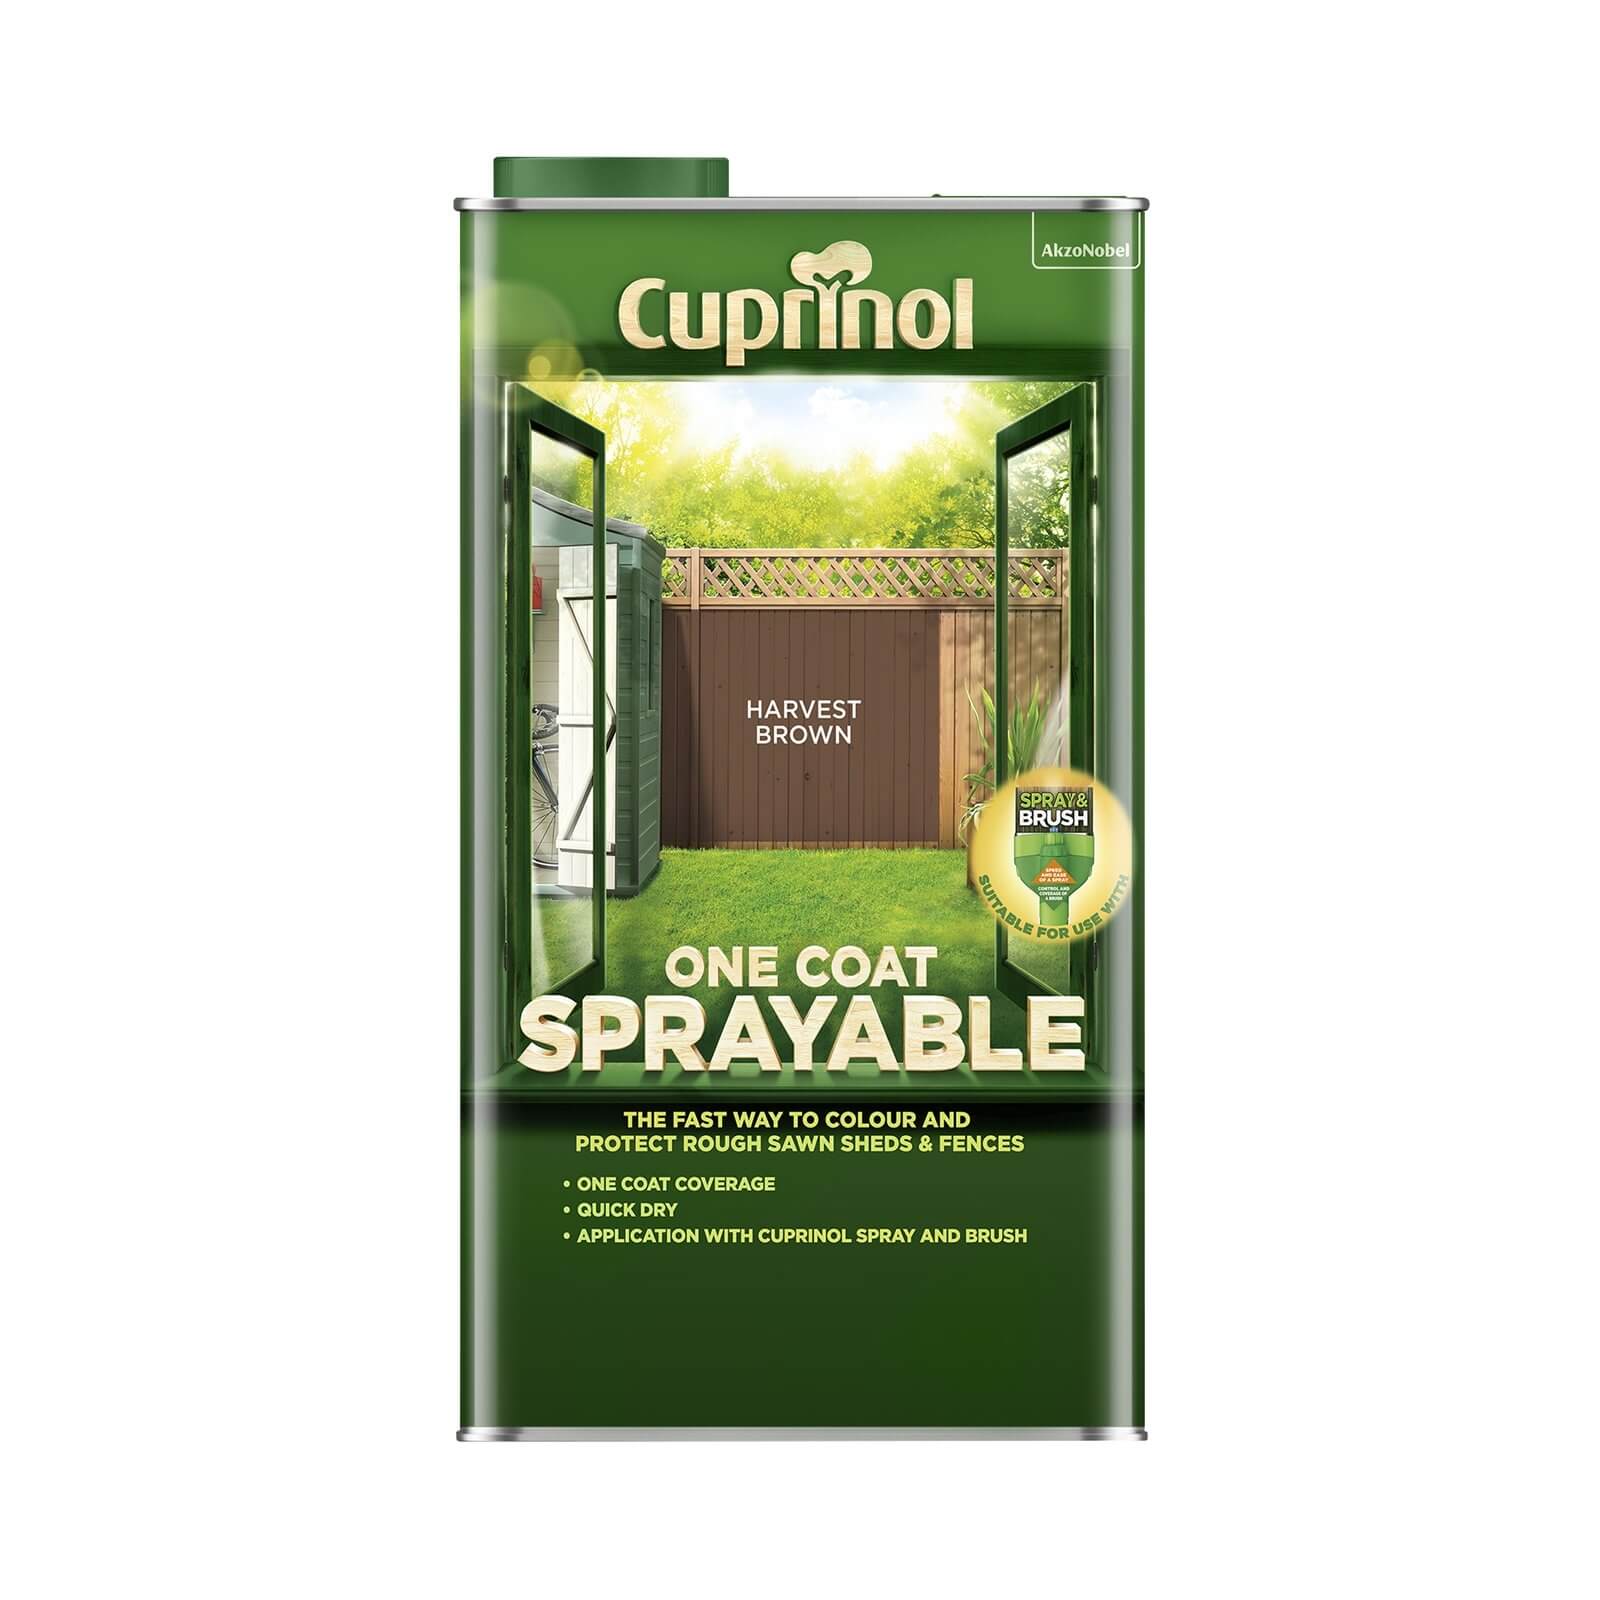 Photo of Cuprinol One Coat Sprayable Shed & Fence Paint - Harvest Brown - 5l